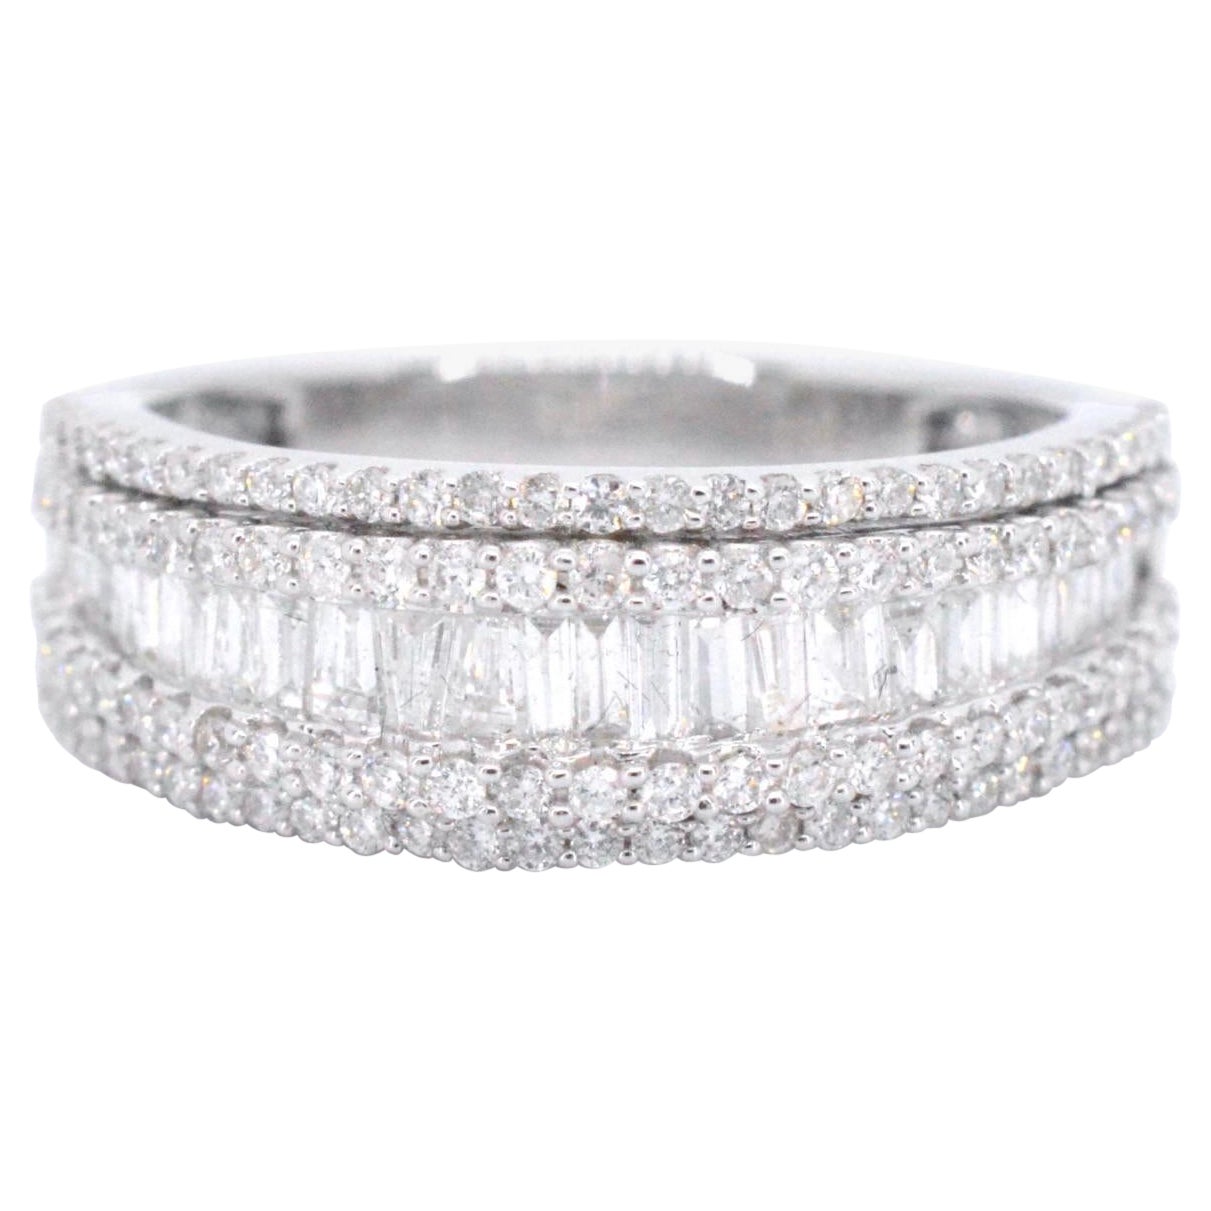 White Gold Band Ring with Five Rows of Diamonds 1.00 Carat